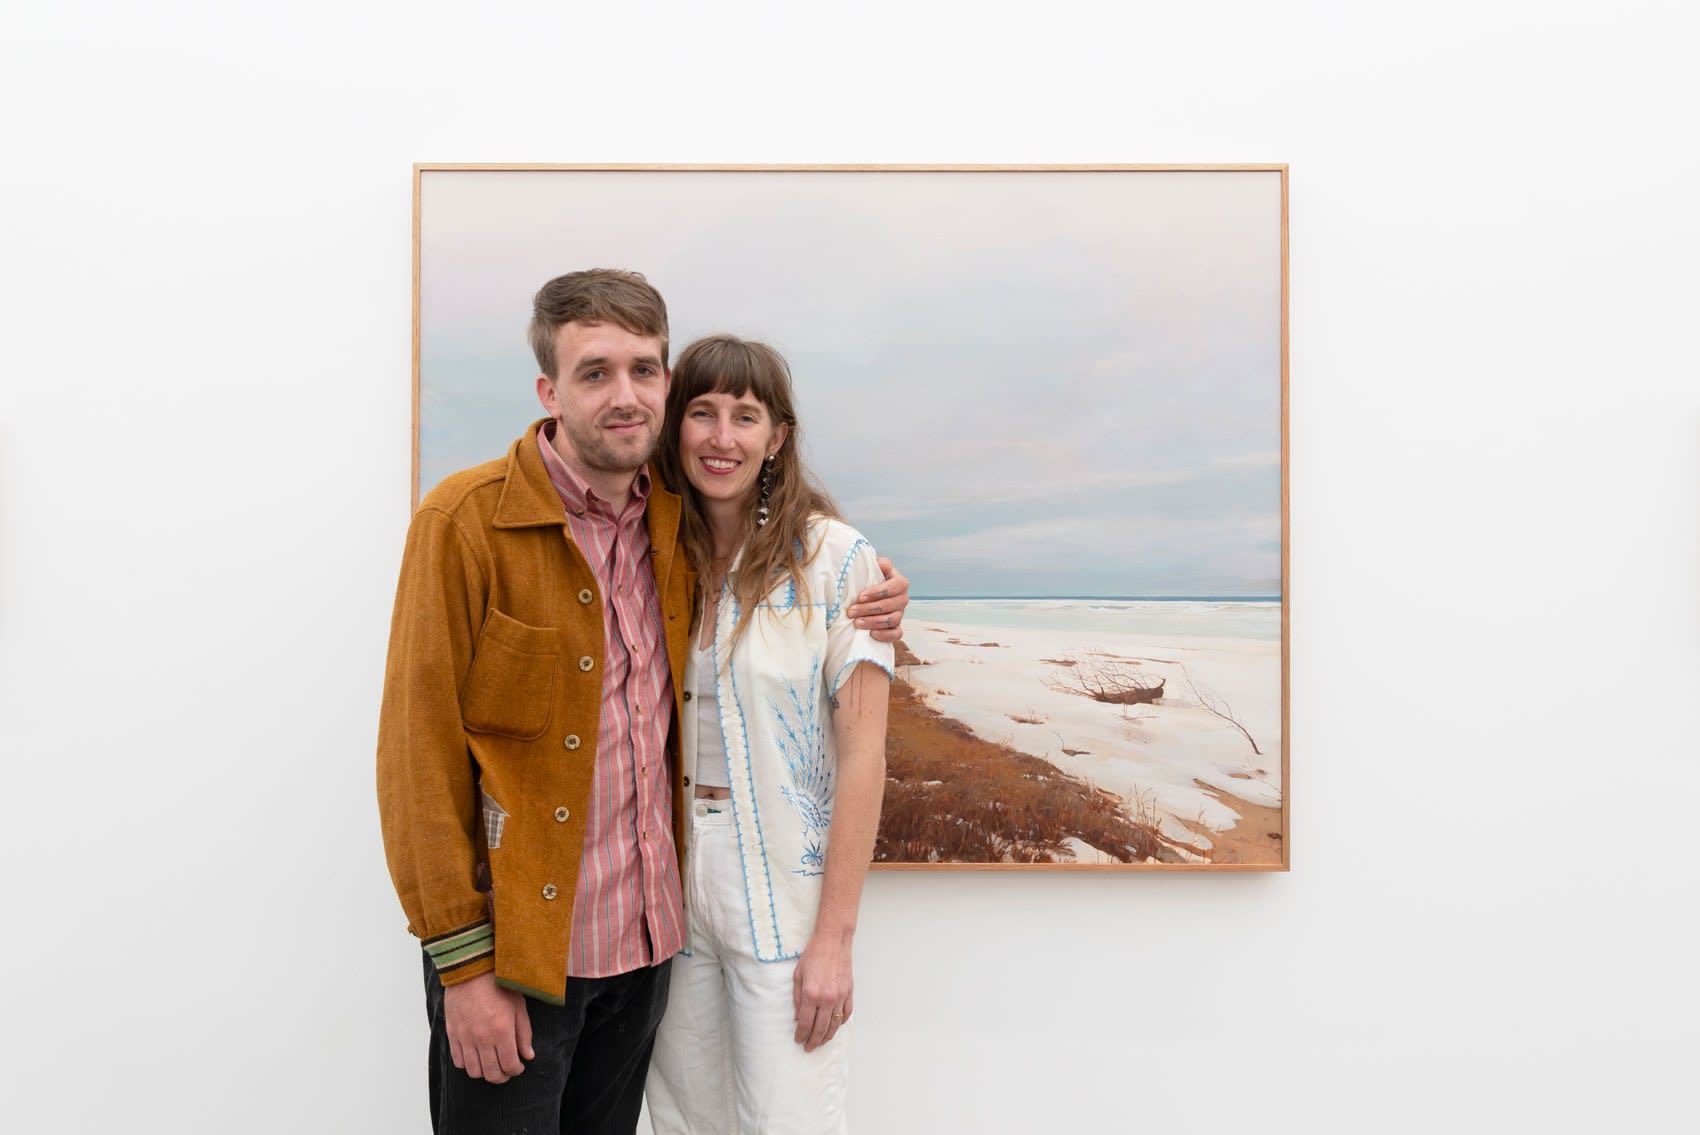 Pat Perry and his partner Rosemary Brown hug in front of one of Pat's paintings inside a large art gallery with white walls and concrete floors. Pat is a dirty blond white man wearing an burnt orange sweater and Rosemary is a dirty blond white woman wearing a white shirt with blue embroidery. 